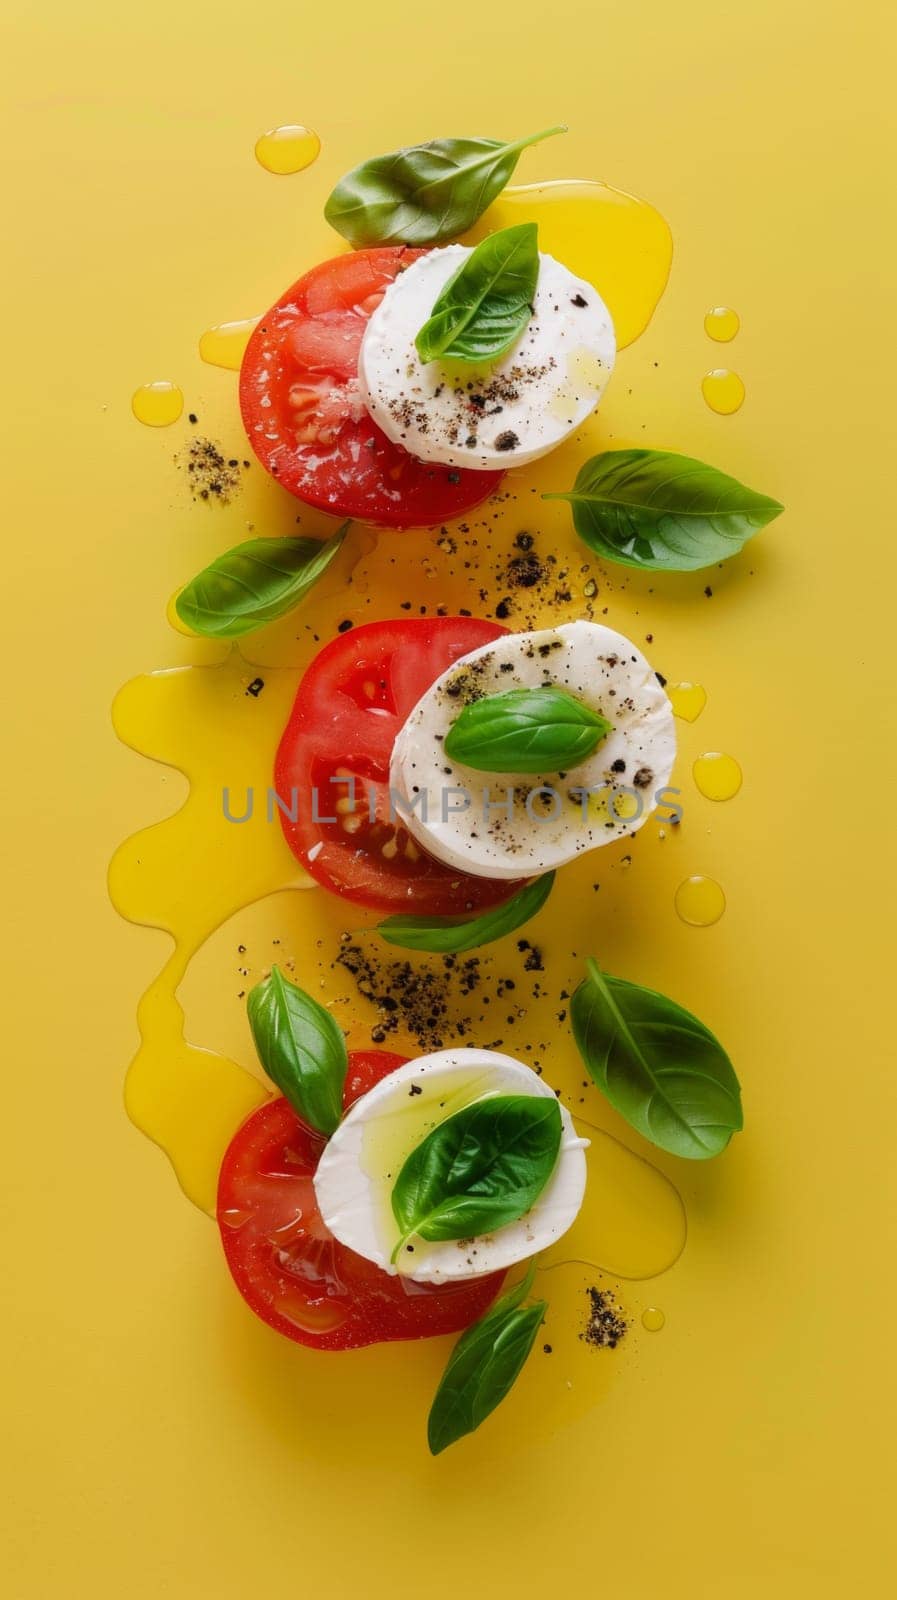 Top view of small portion of caprese salad on yellow background by papatonic